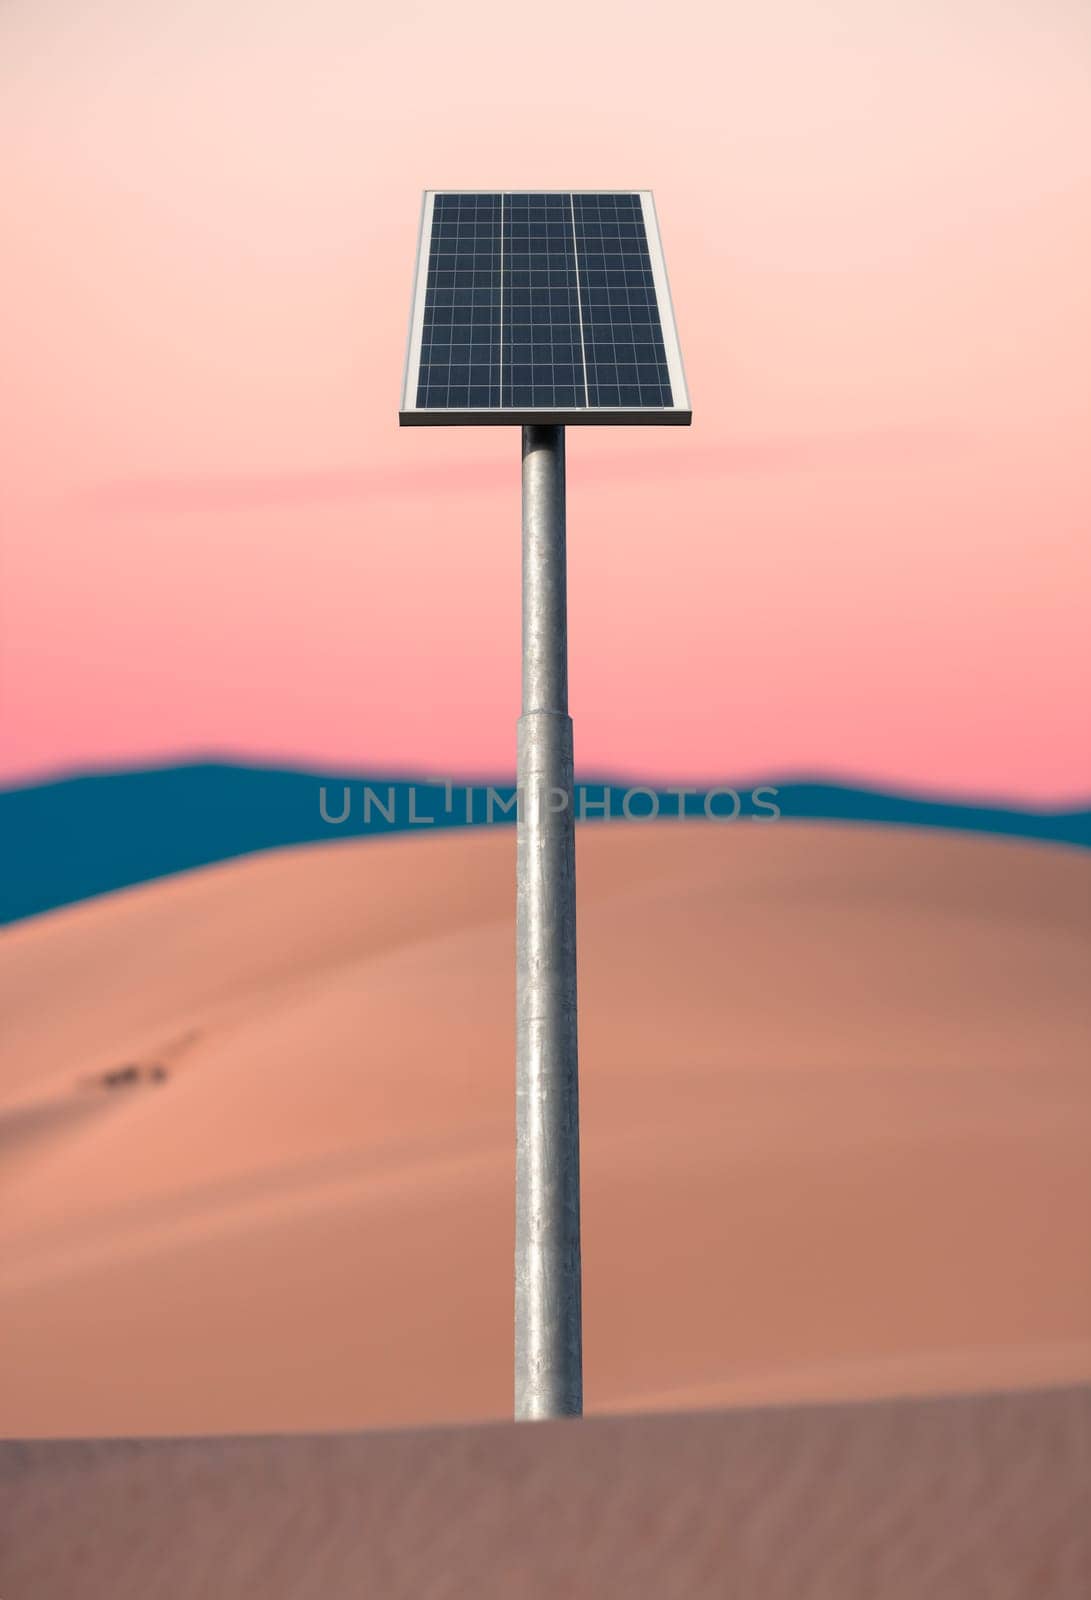 A Solar Panel In A Remote Location In A Desert, At Sunset